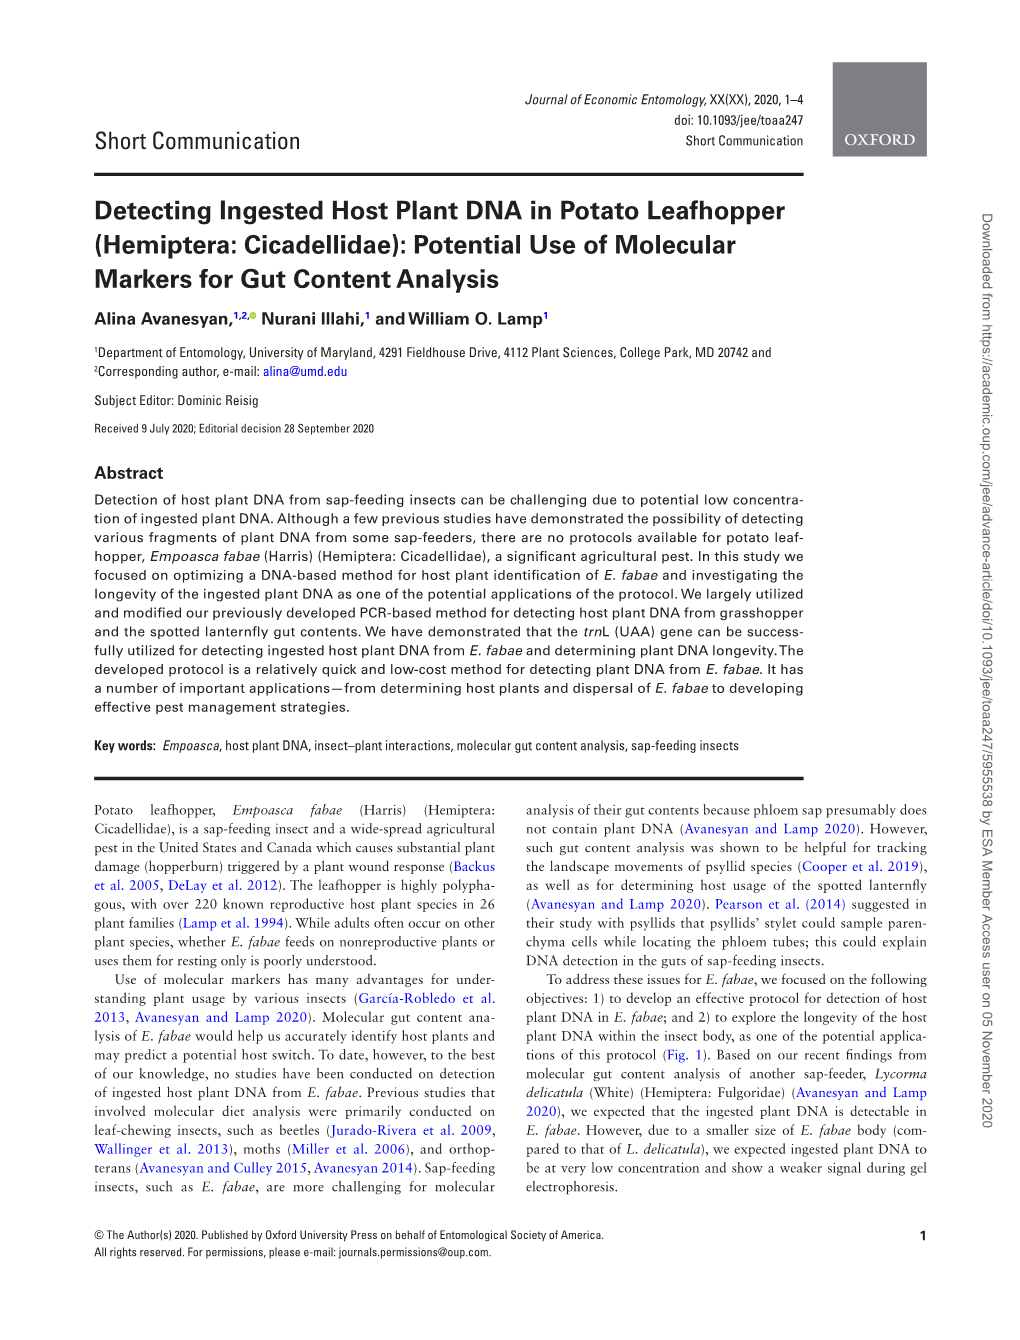 Detecting Ingested Host Plant DNA in Potato Leafhopper (Hemiptera